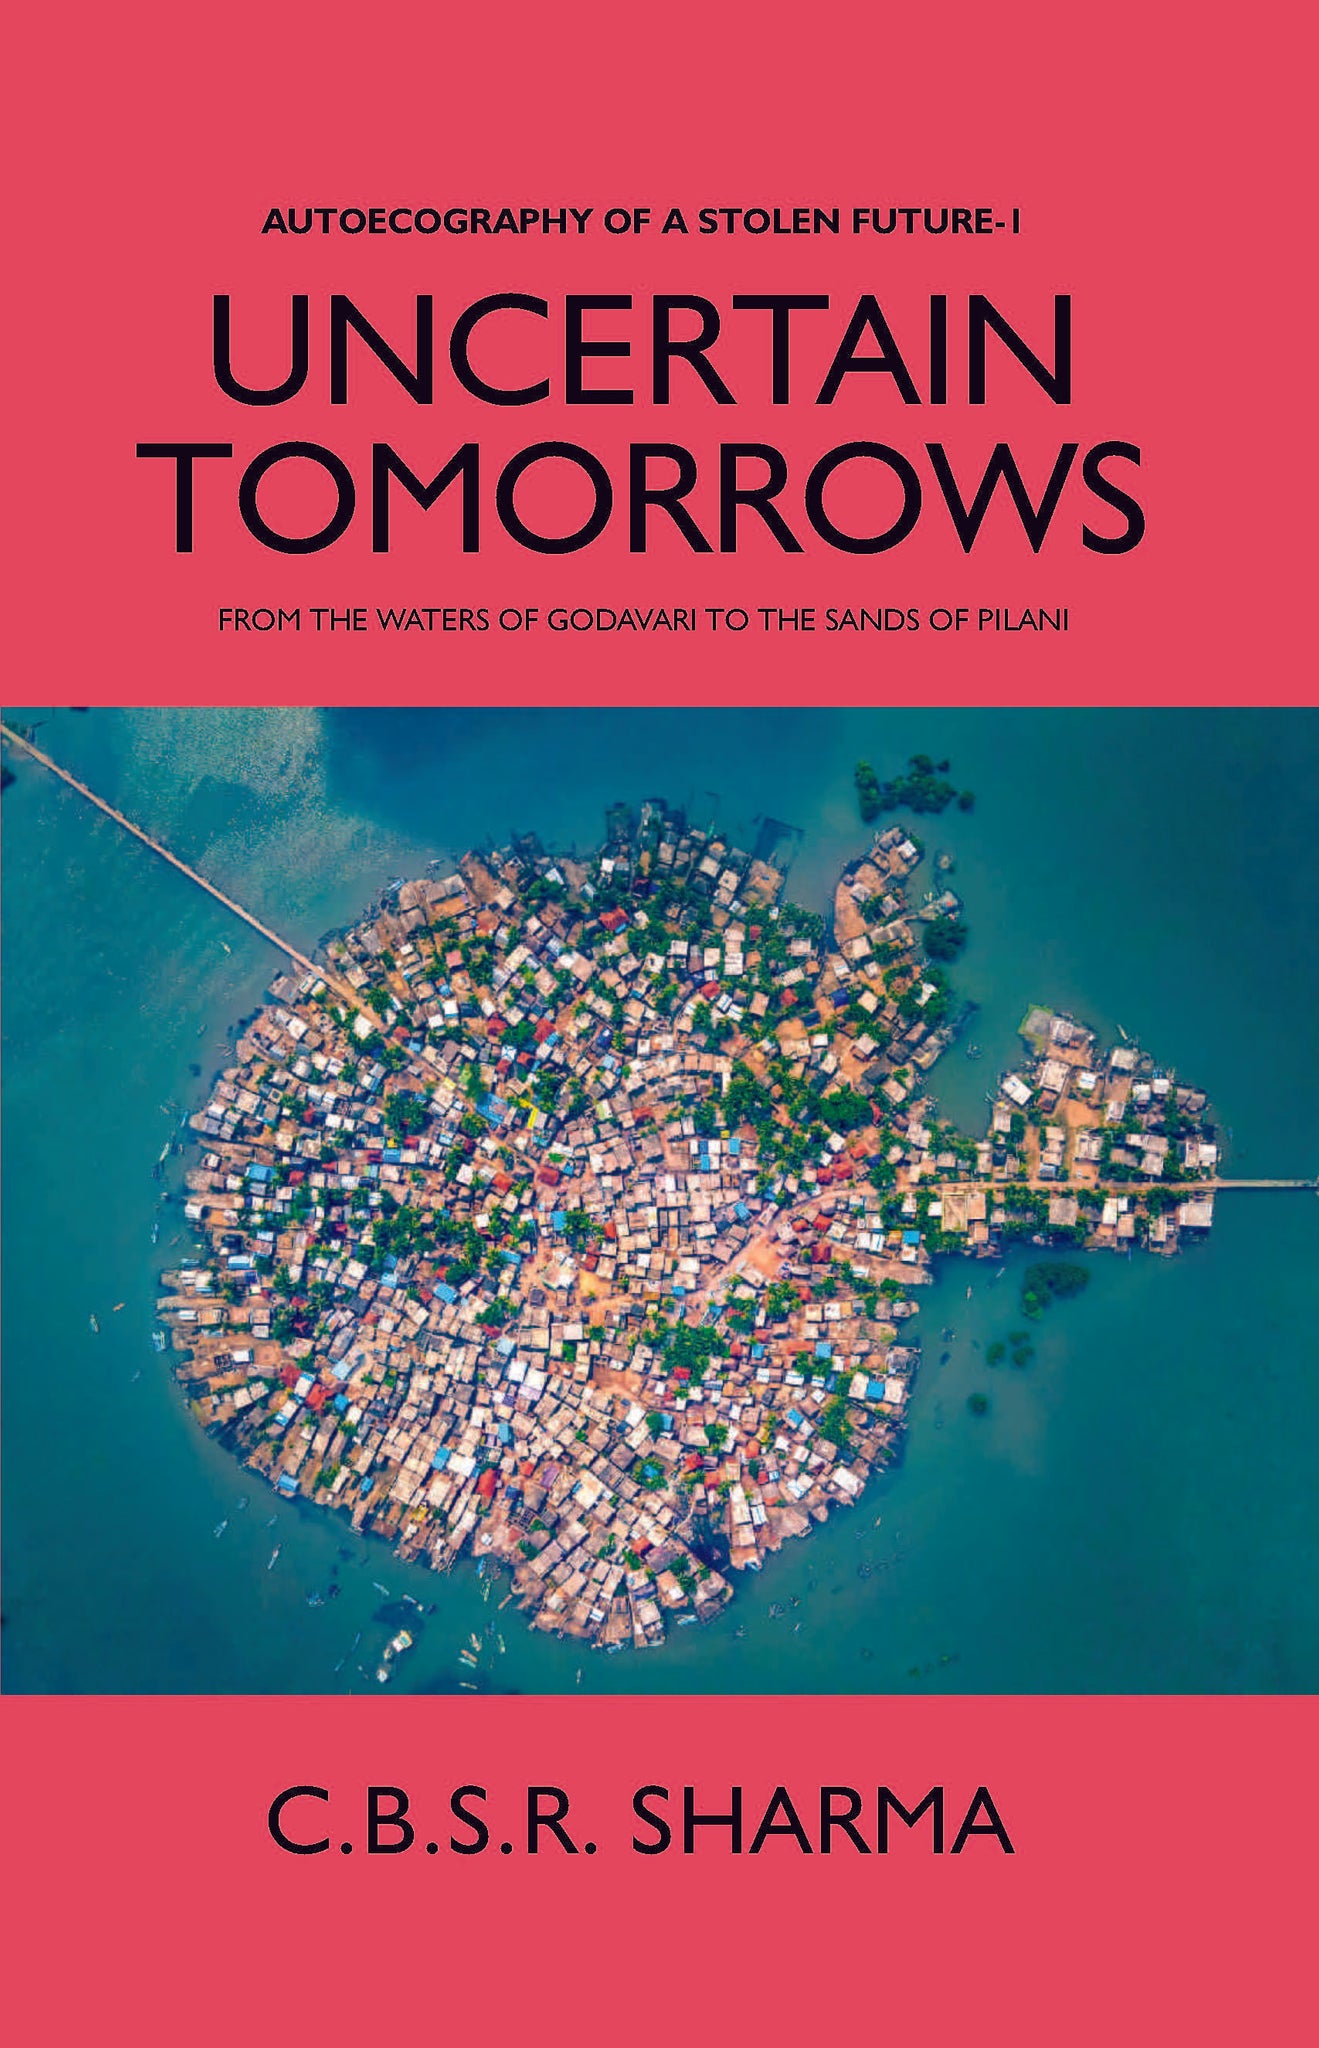 UNCERTAIN TOMORROWS: FROM THE WATERS OF GODAVARI TO THE SANDS OF PILANI (AUTOECOGRAPHY OF A STOLEN FUTURE - 1)